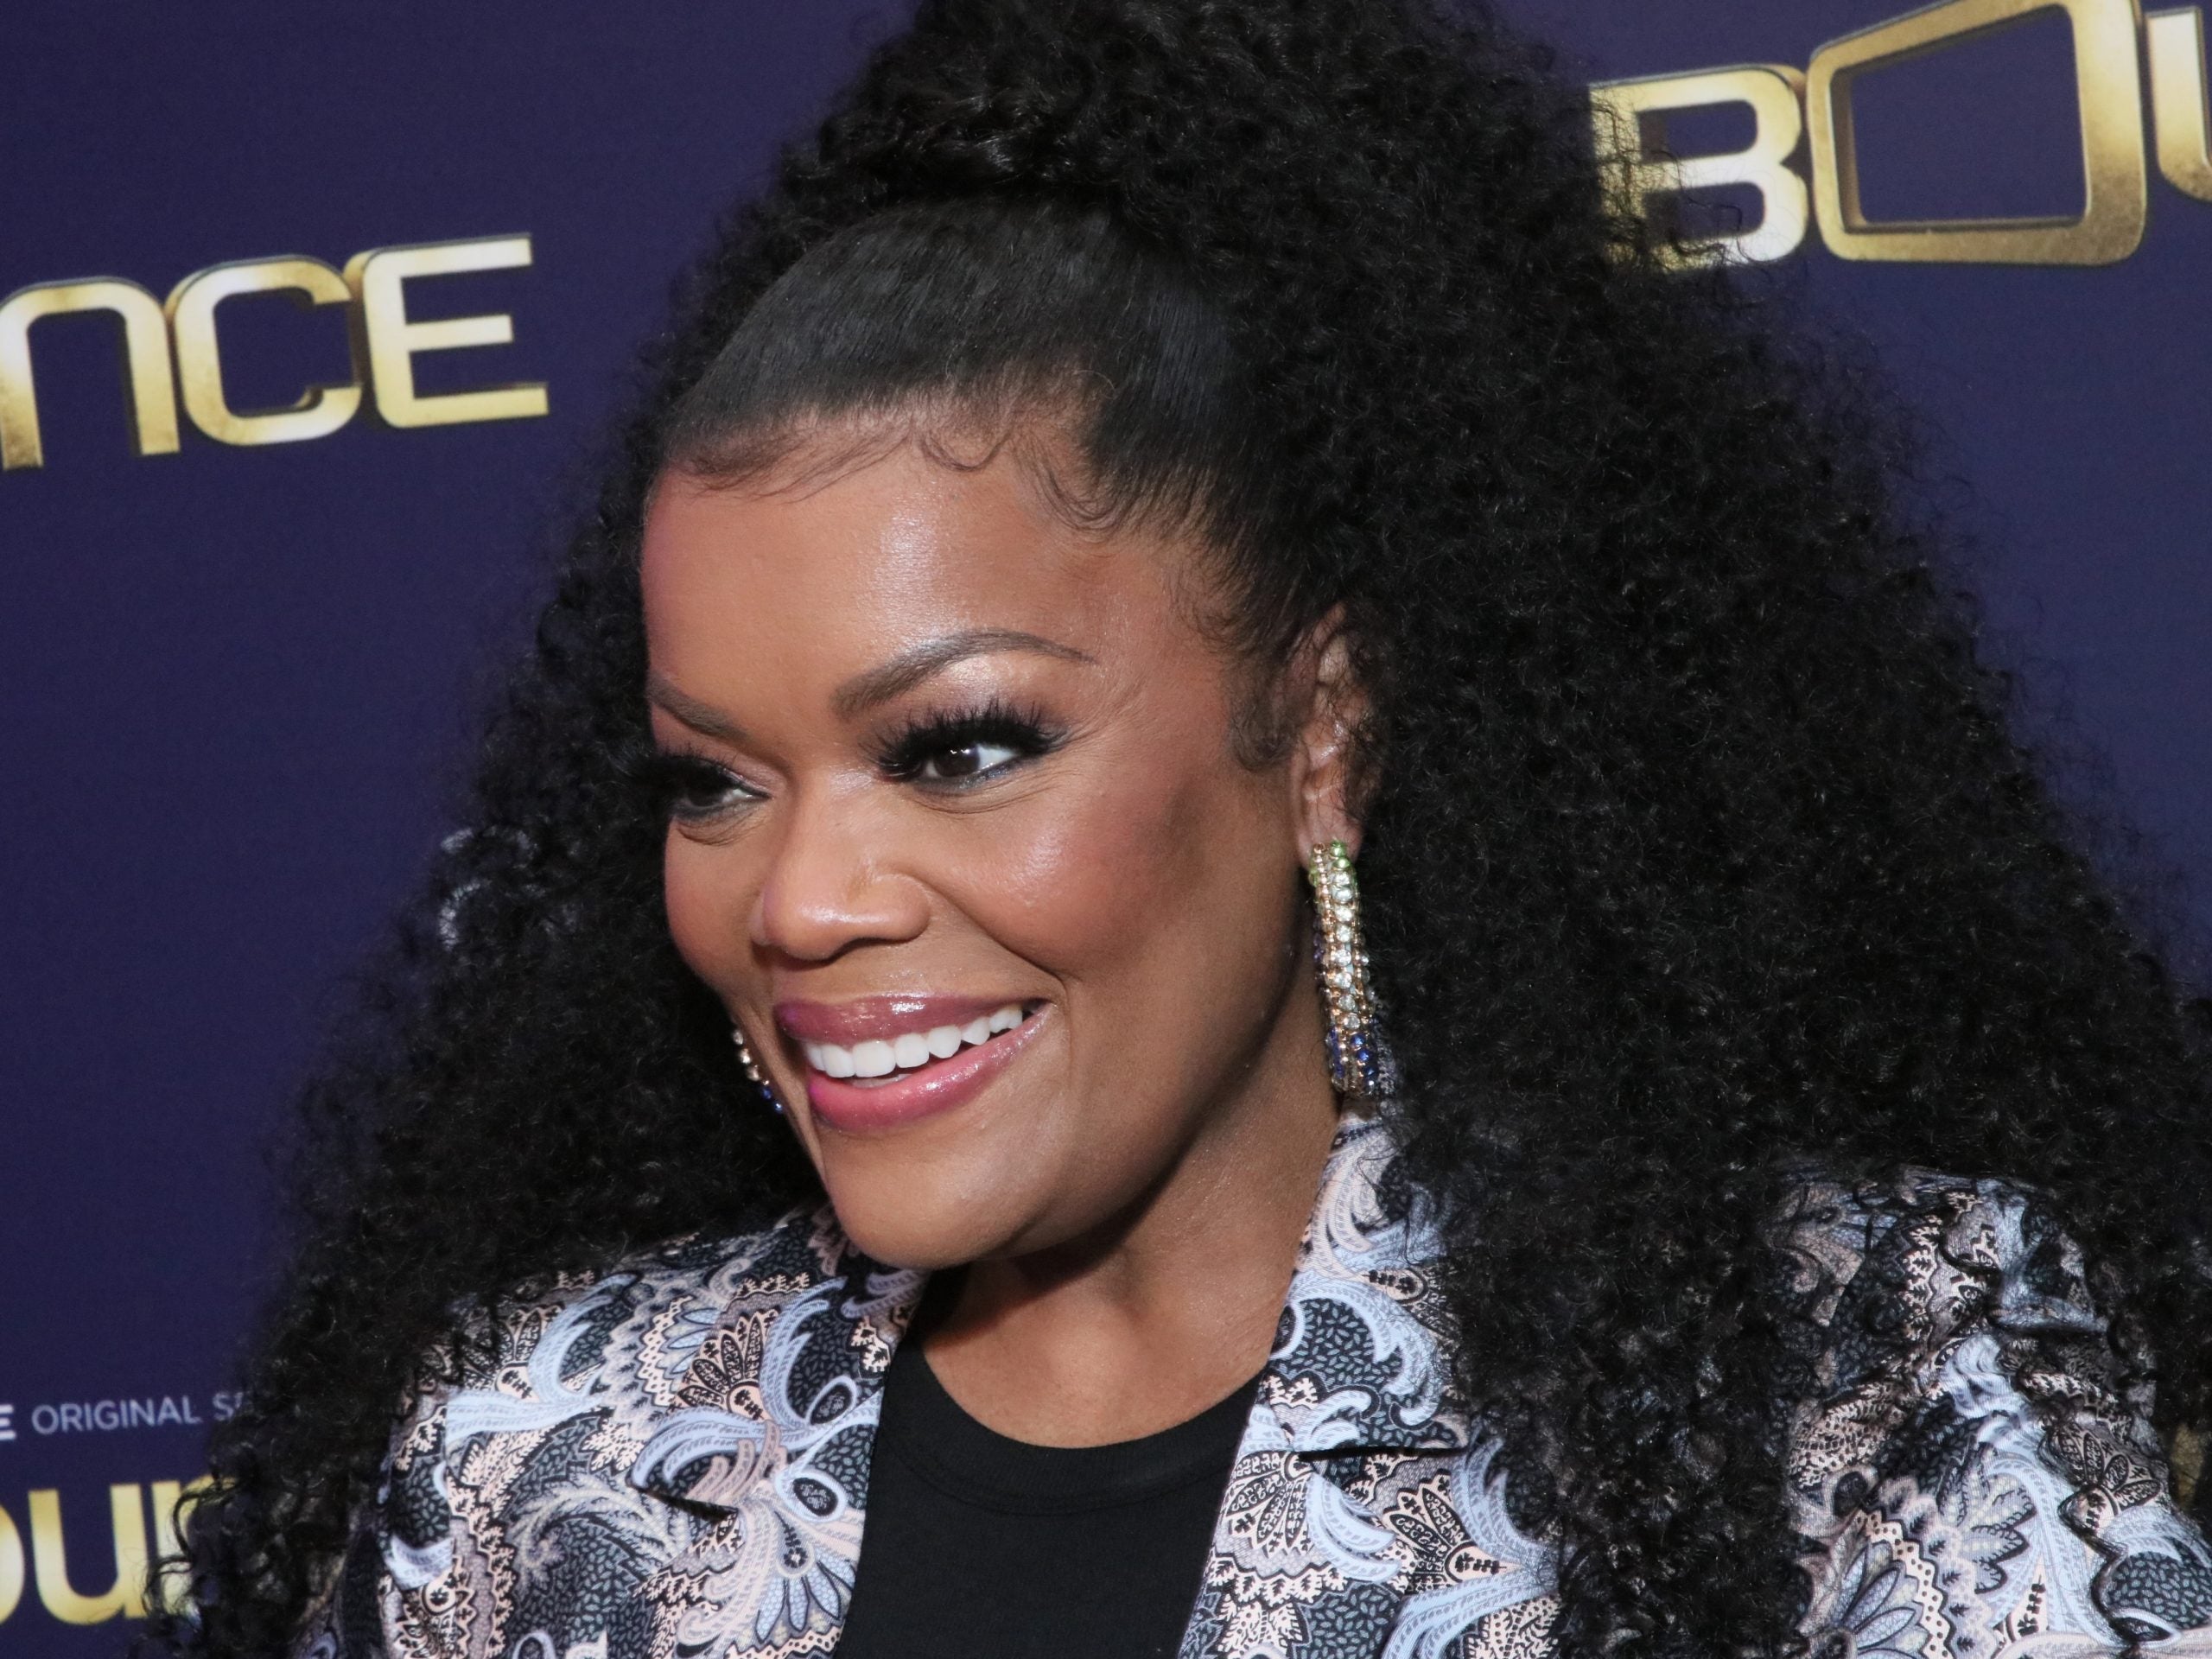 Yvette Nicole Brown Joins The 'It’s Bigger Than Me' Movement To Destigmatize Obesity